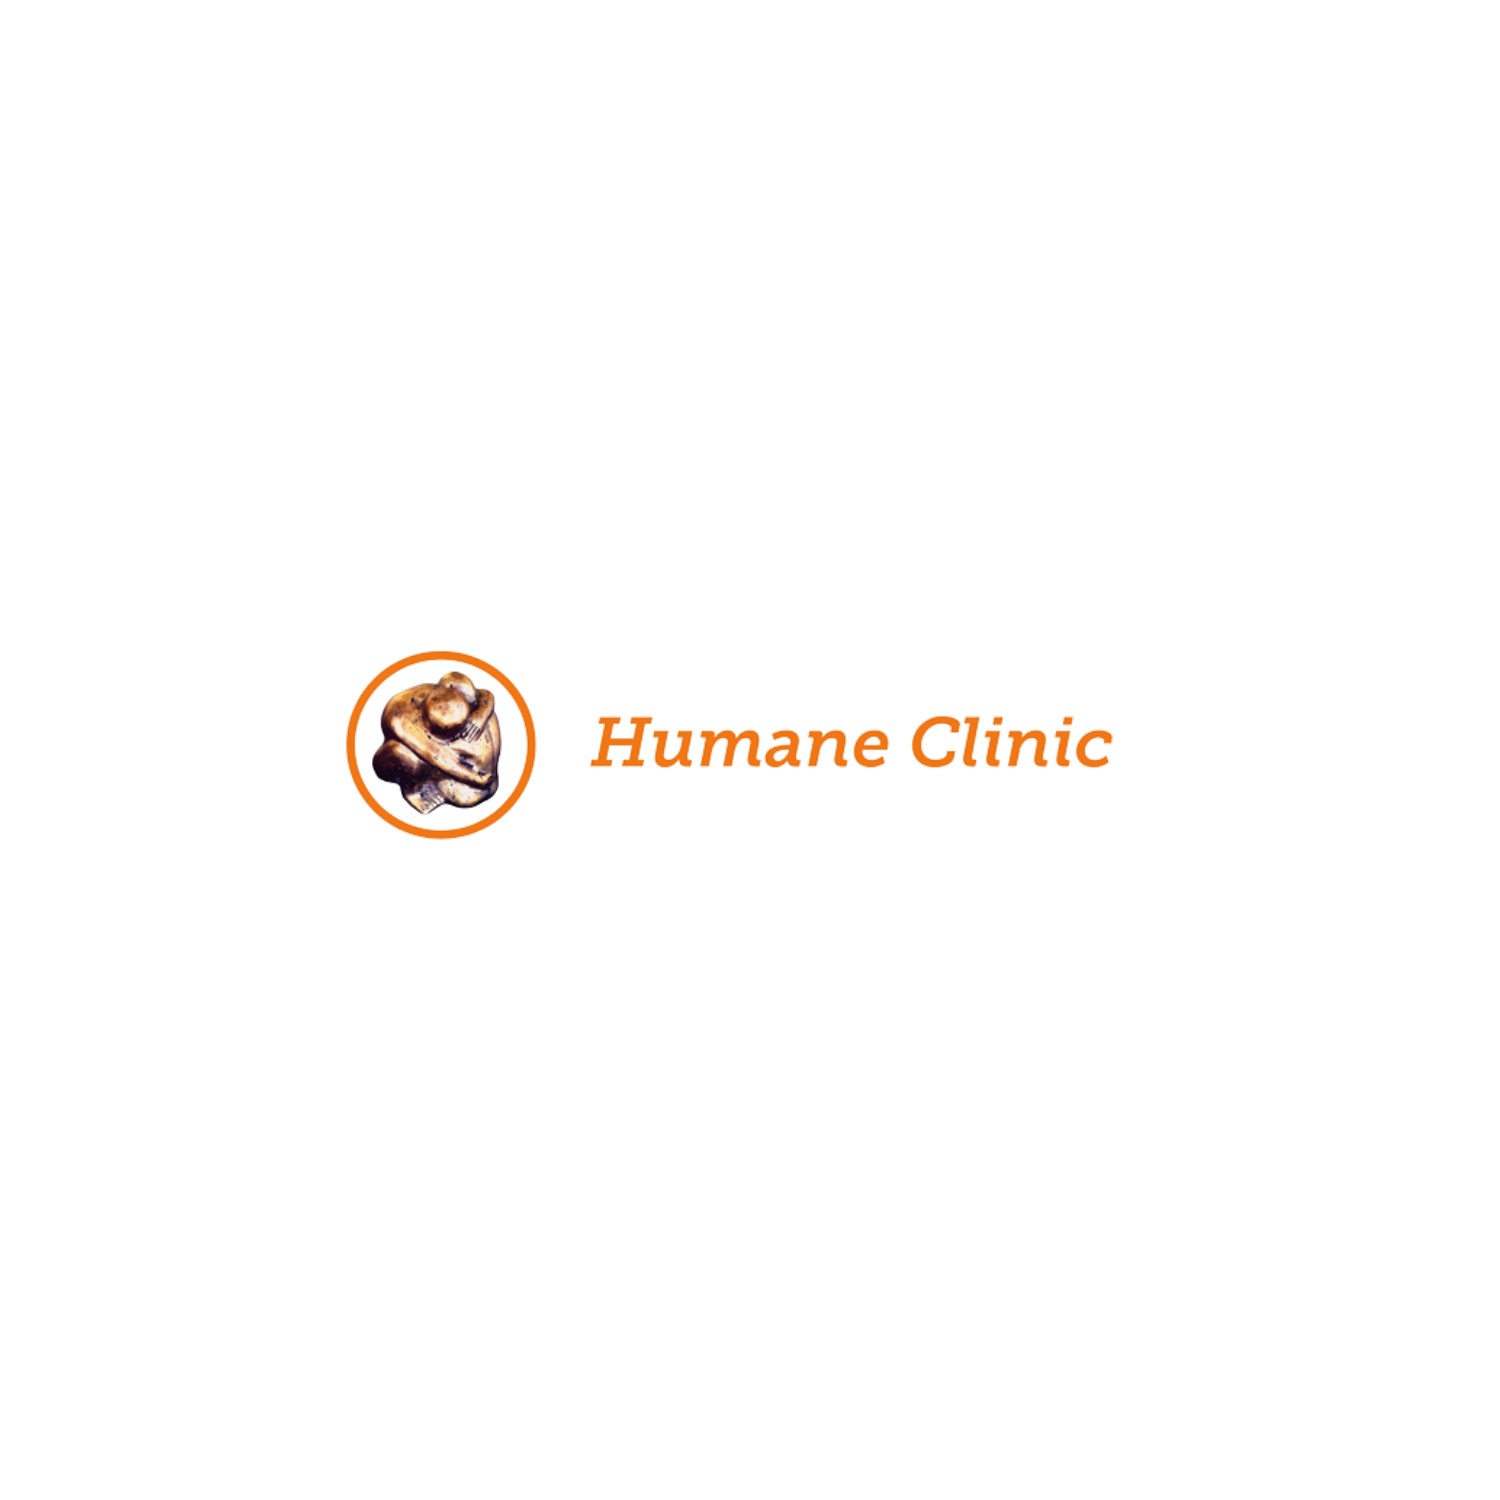 Logo for the Humane Clinic